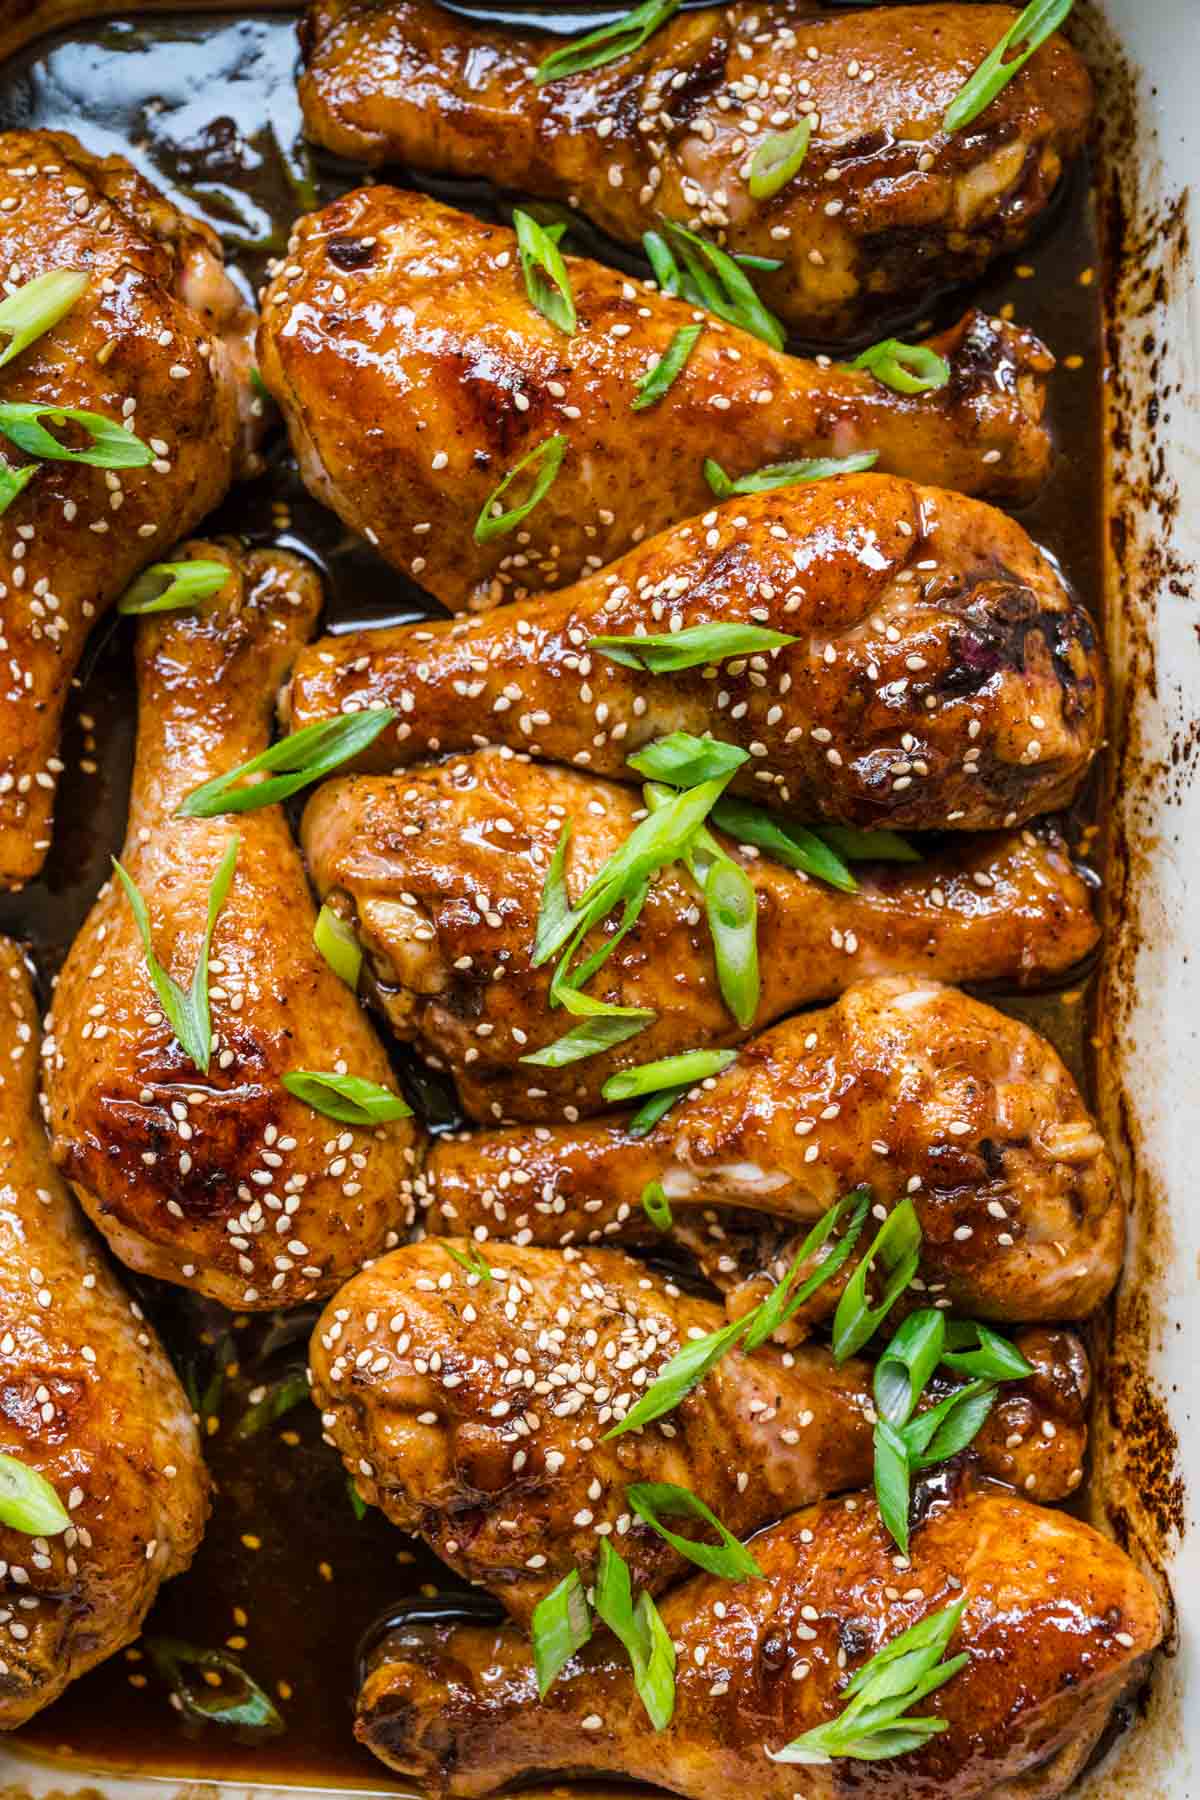 Brown Sugar Garlic Baked Chicken Legs sauce and chicken in baking dish with sliced green onions and sesame seeds